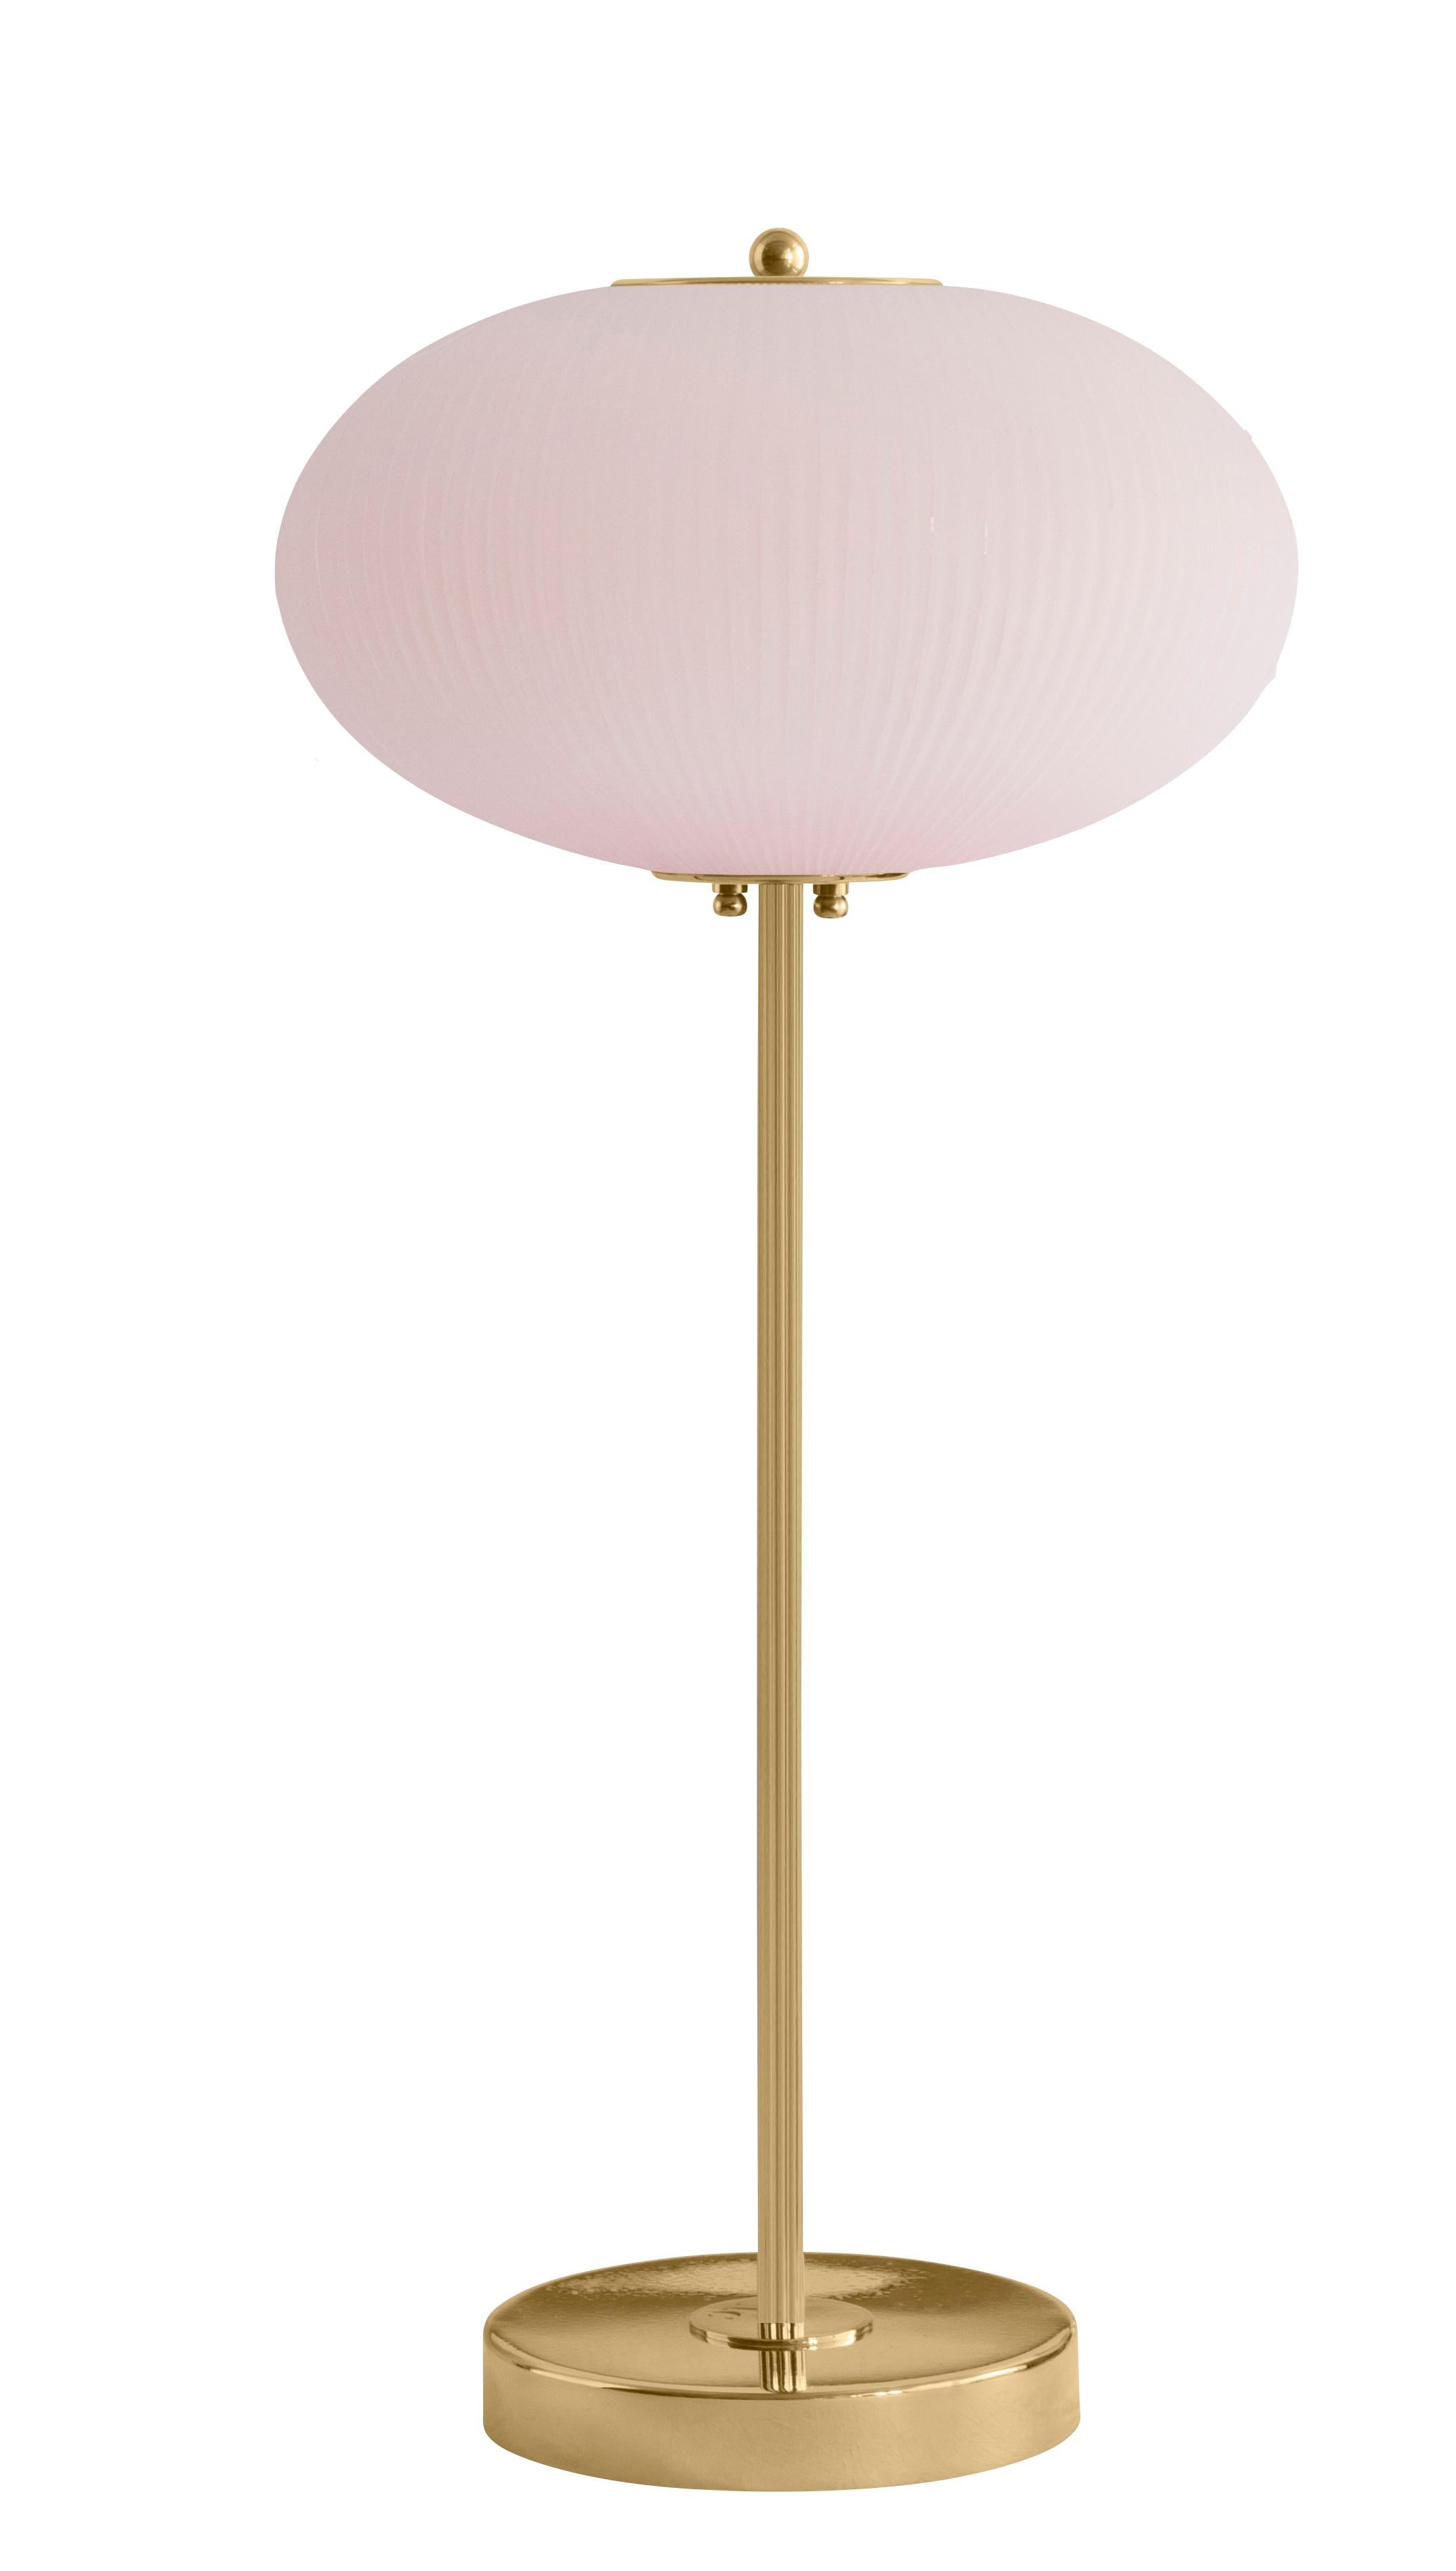 Table lamp China 07 by Magic Circus Editions.
Dimensions: H 70 x W 32 x D 32 cm.
Materials: brass, mouth blown glass sculpted with a diamond saw.
Colour: soft rose.

Available finishes: brass, nickel.
Available colours: enamel soft white, soft